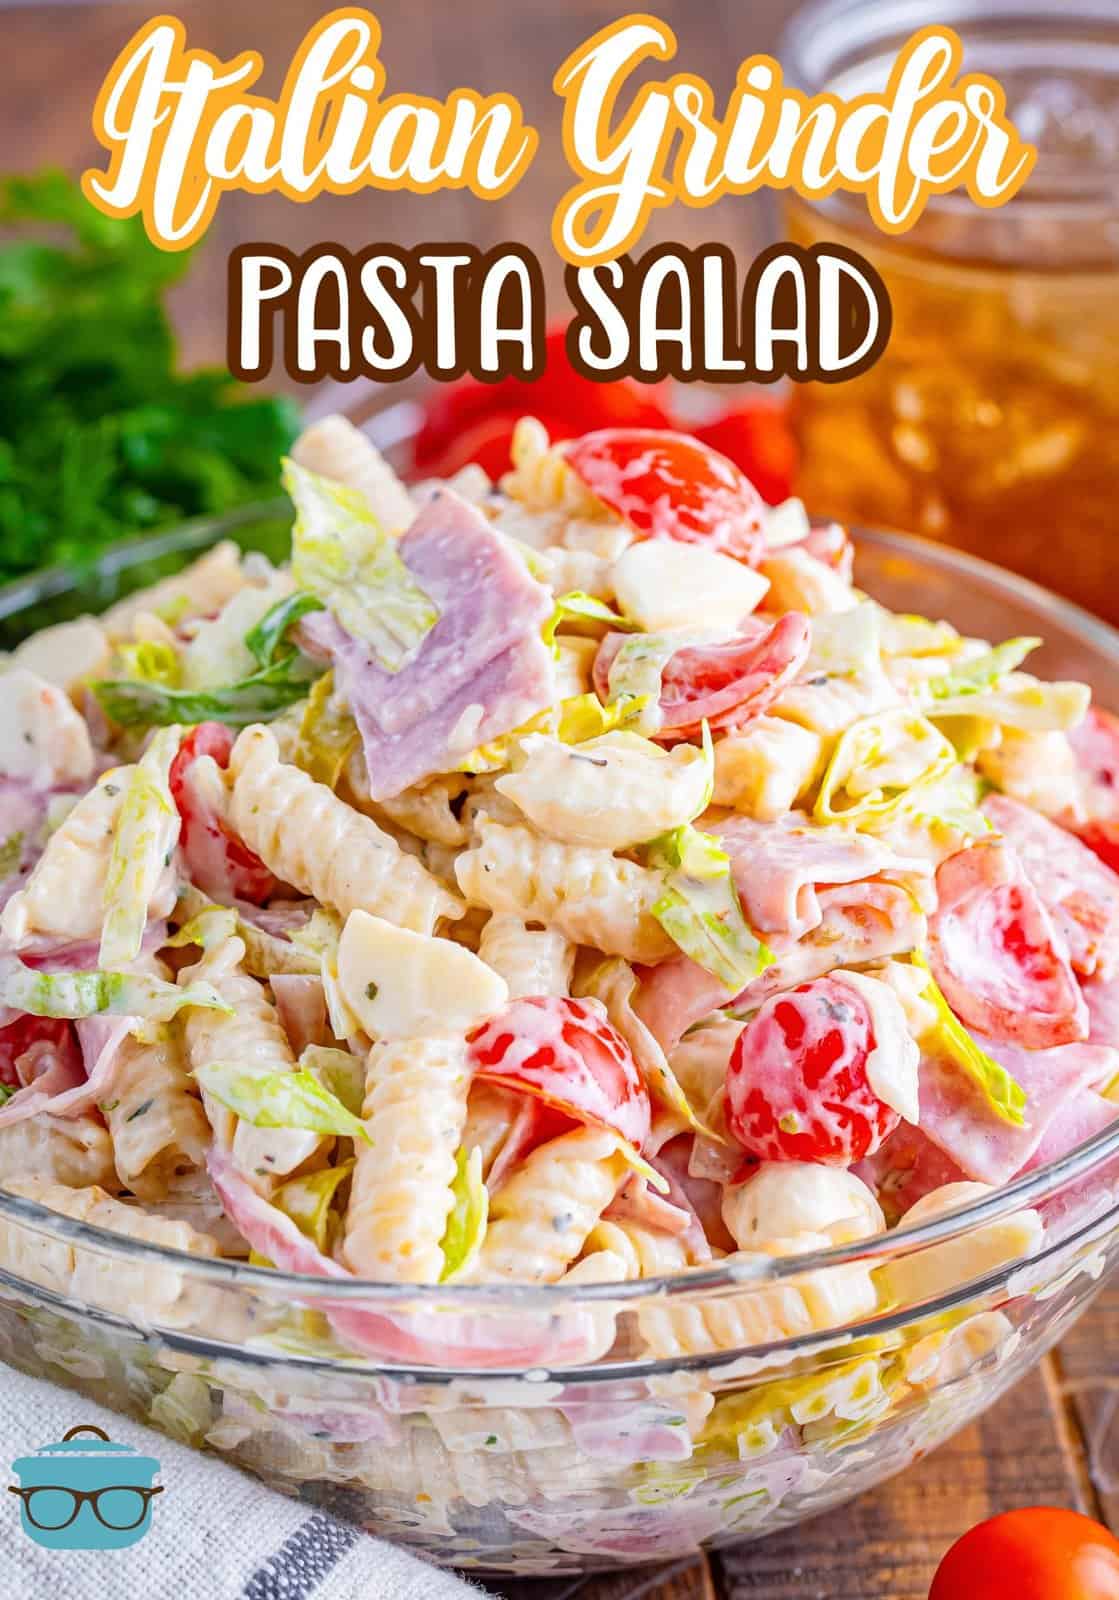 A heaping mounds of Italian grinder pasta salad and a glass mixing bowl.